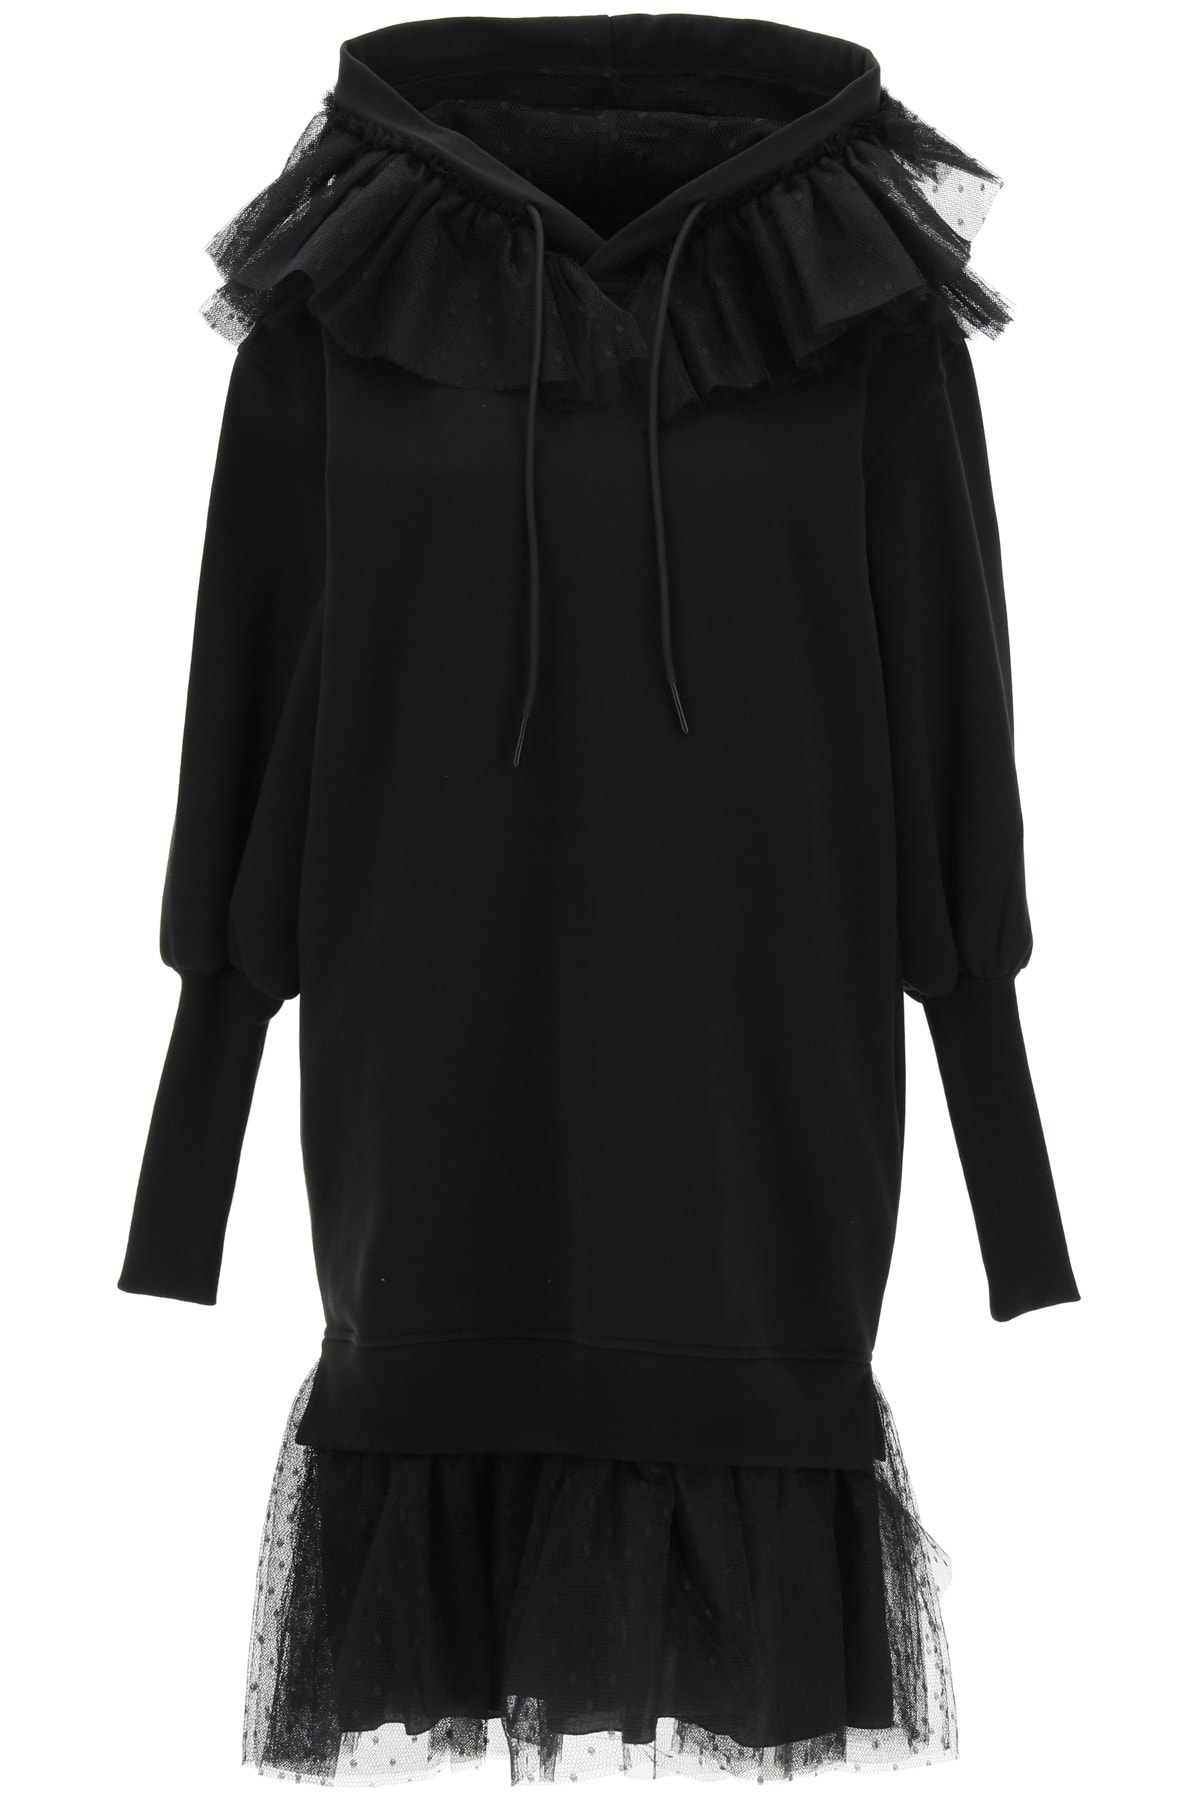 RED Valentino Fleece Dress With Tulle Point Desprit